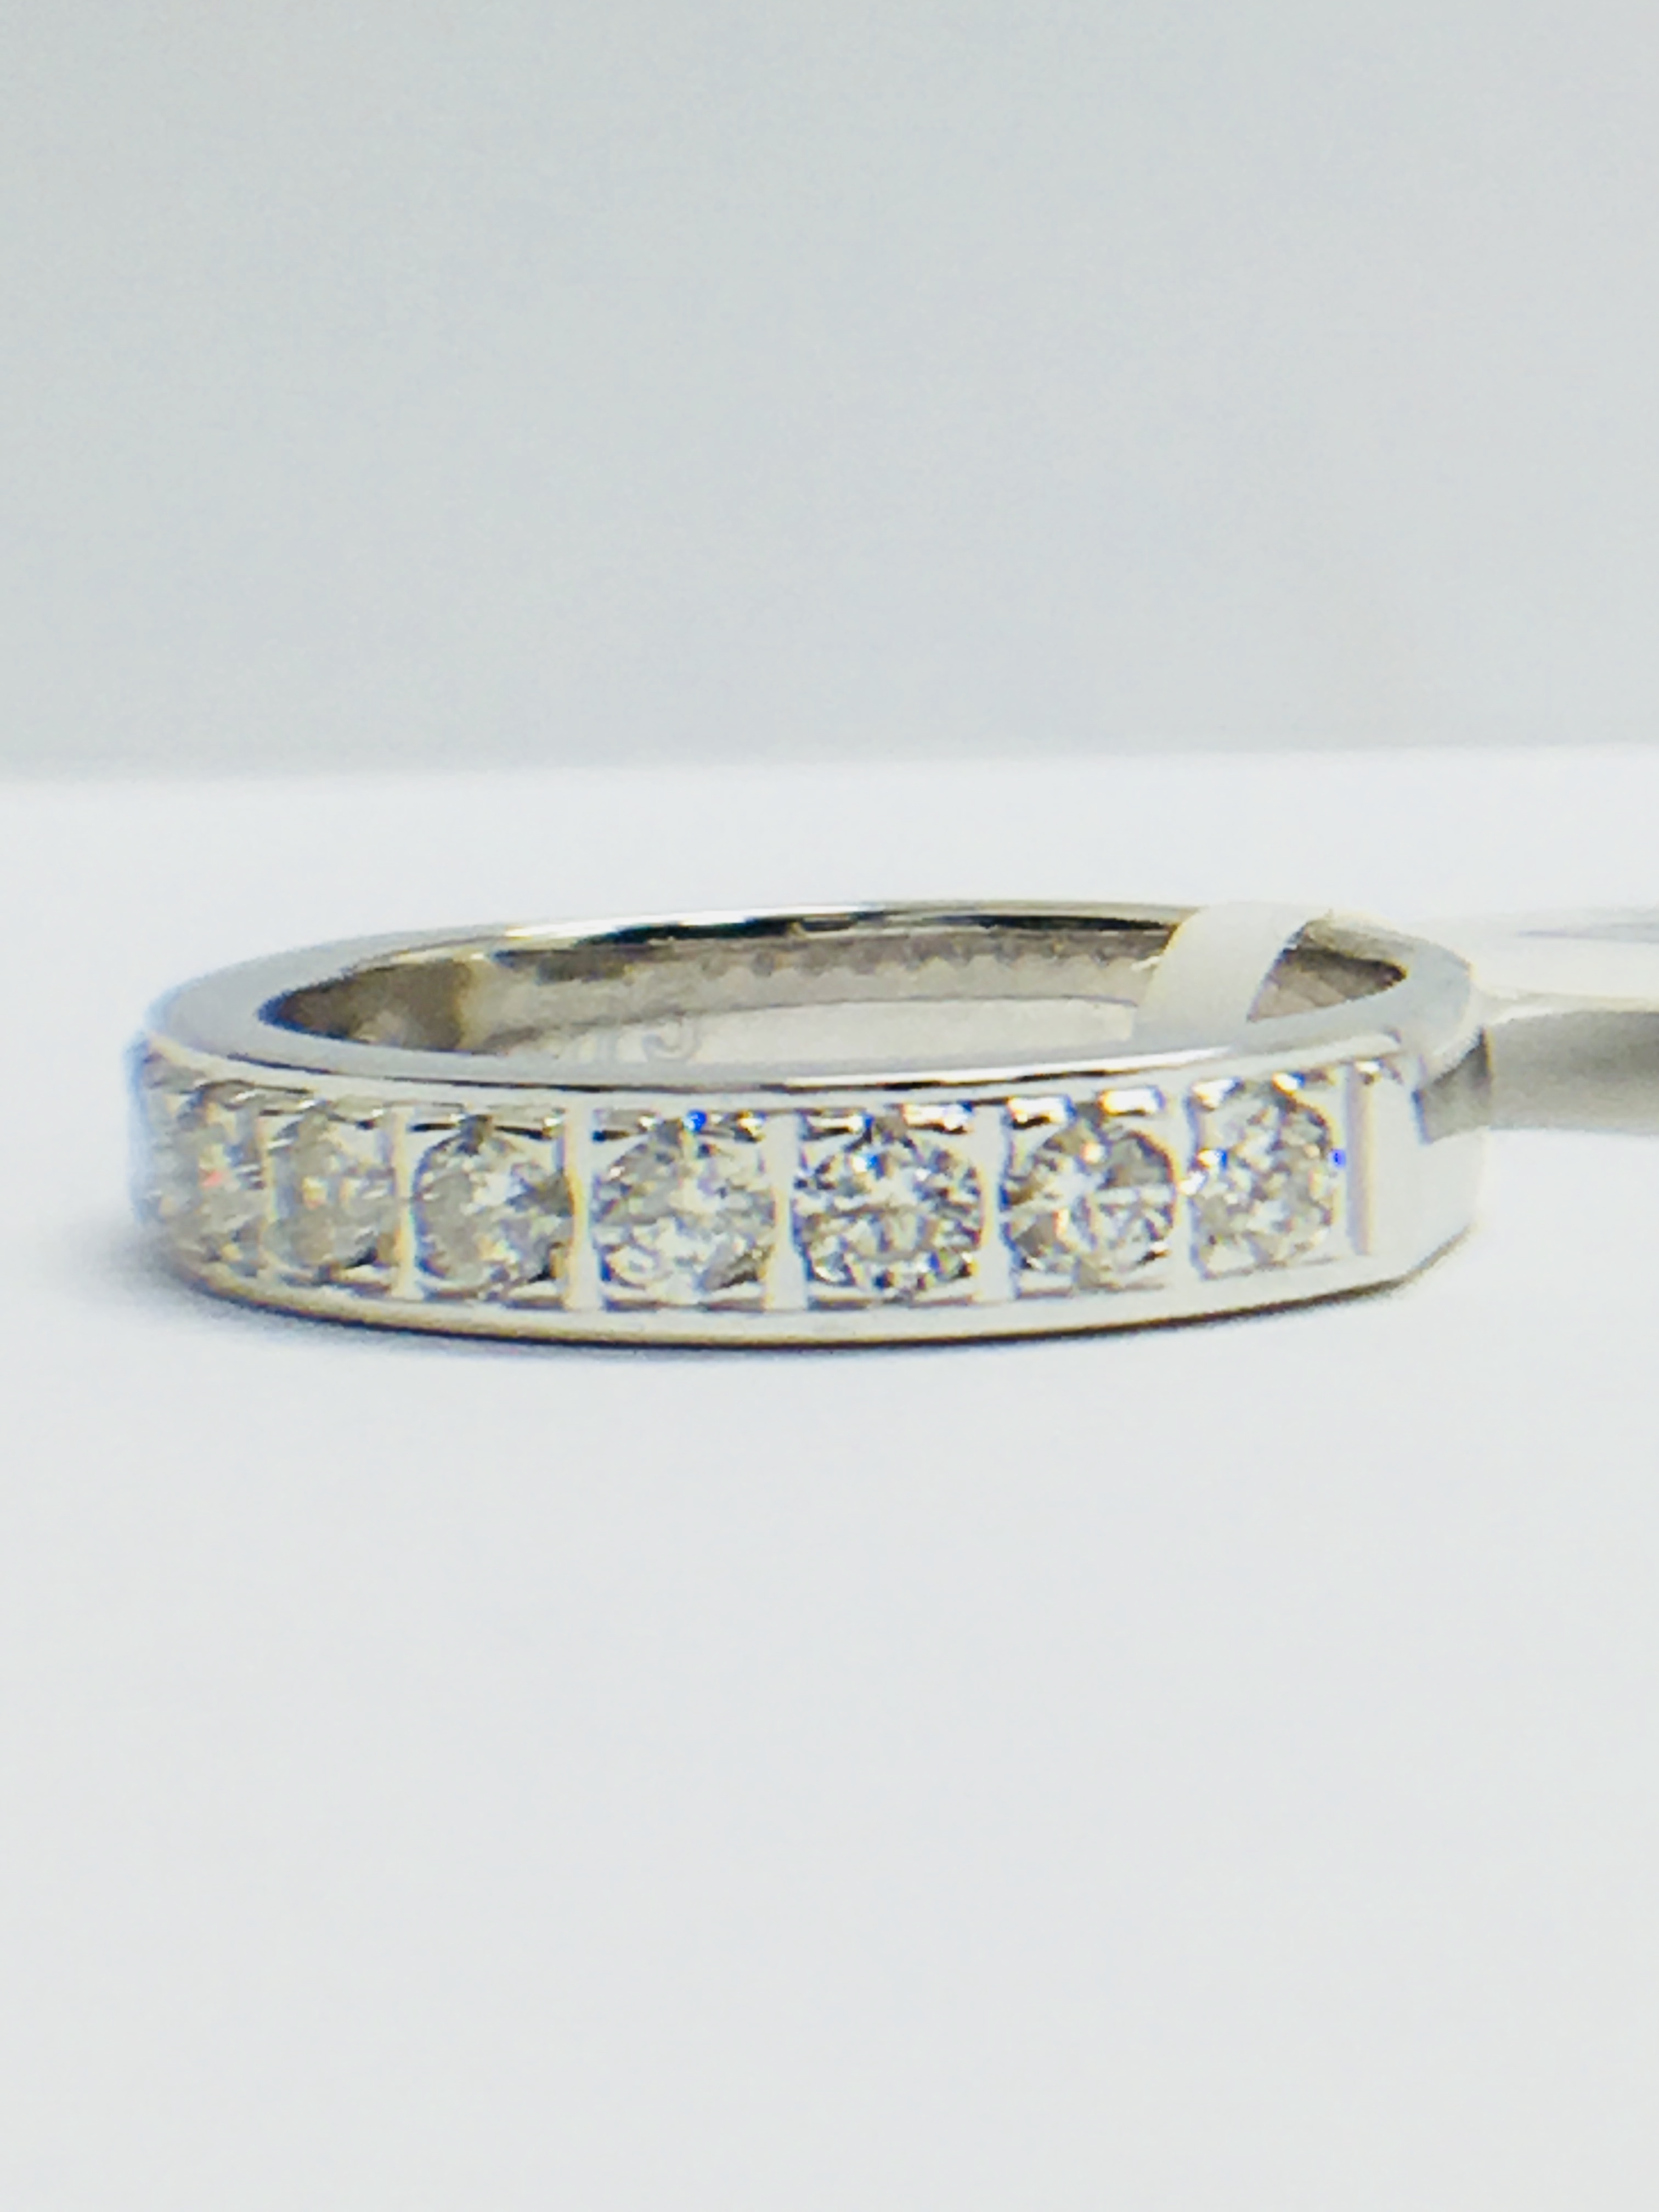 9ct white gold Eternity Ring - Image 2 of 6